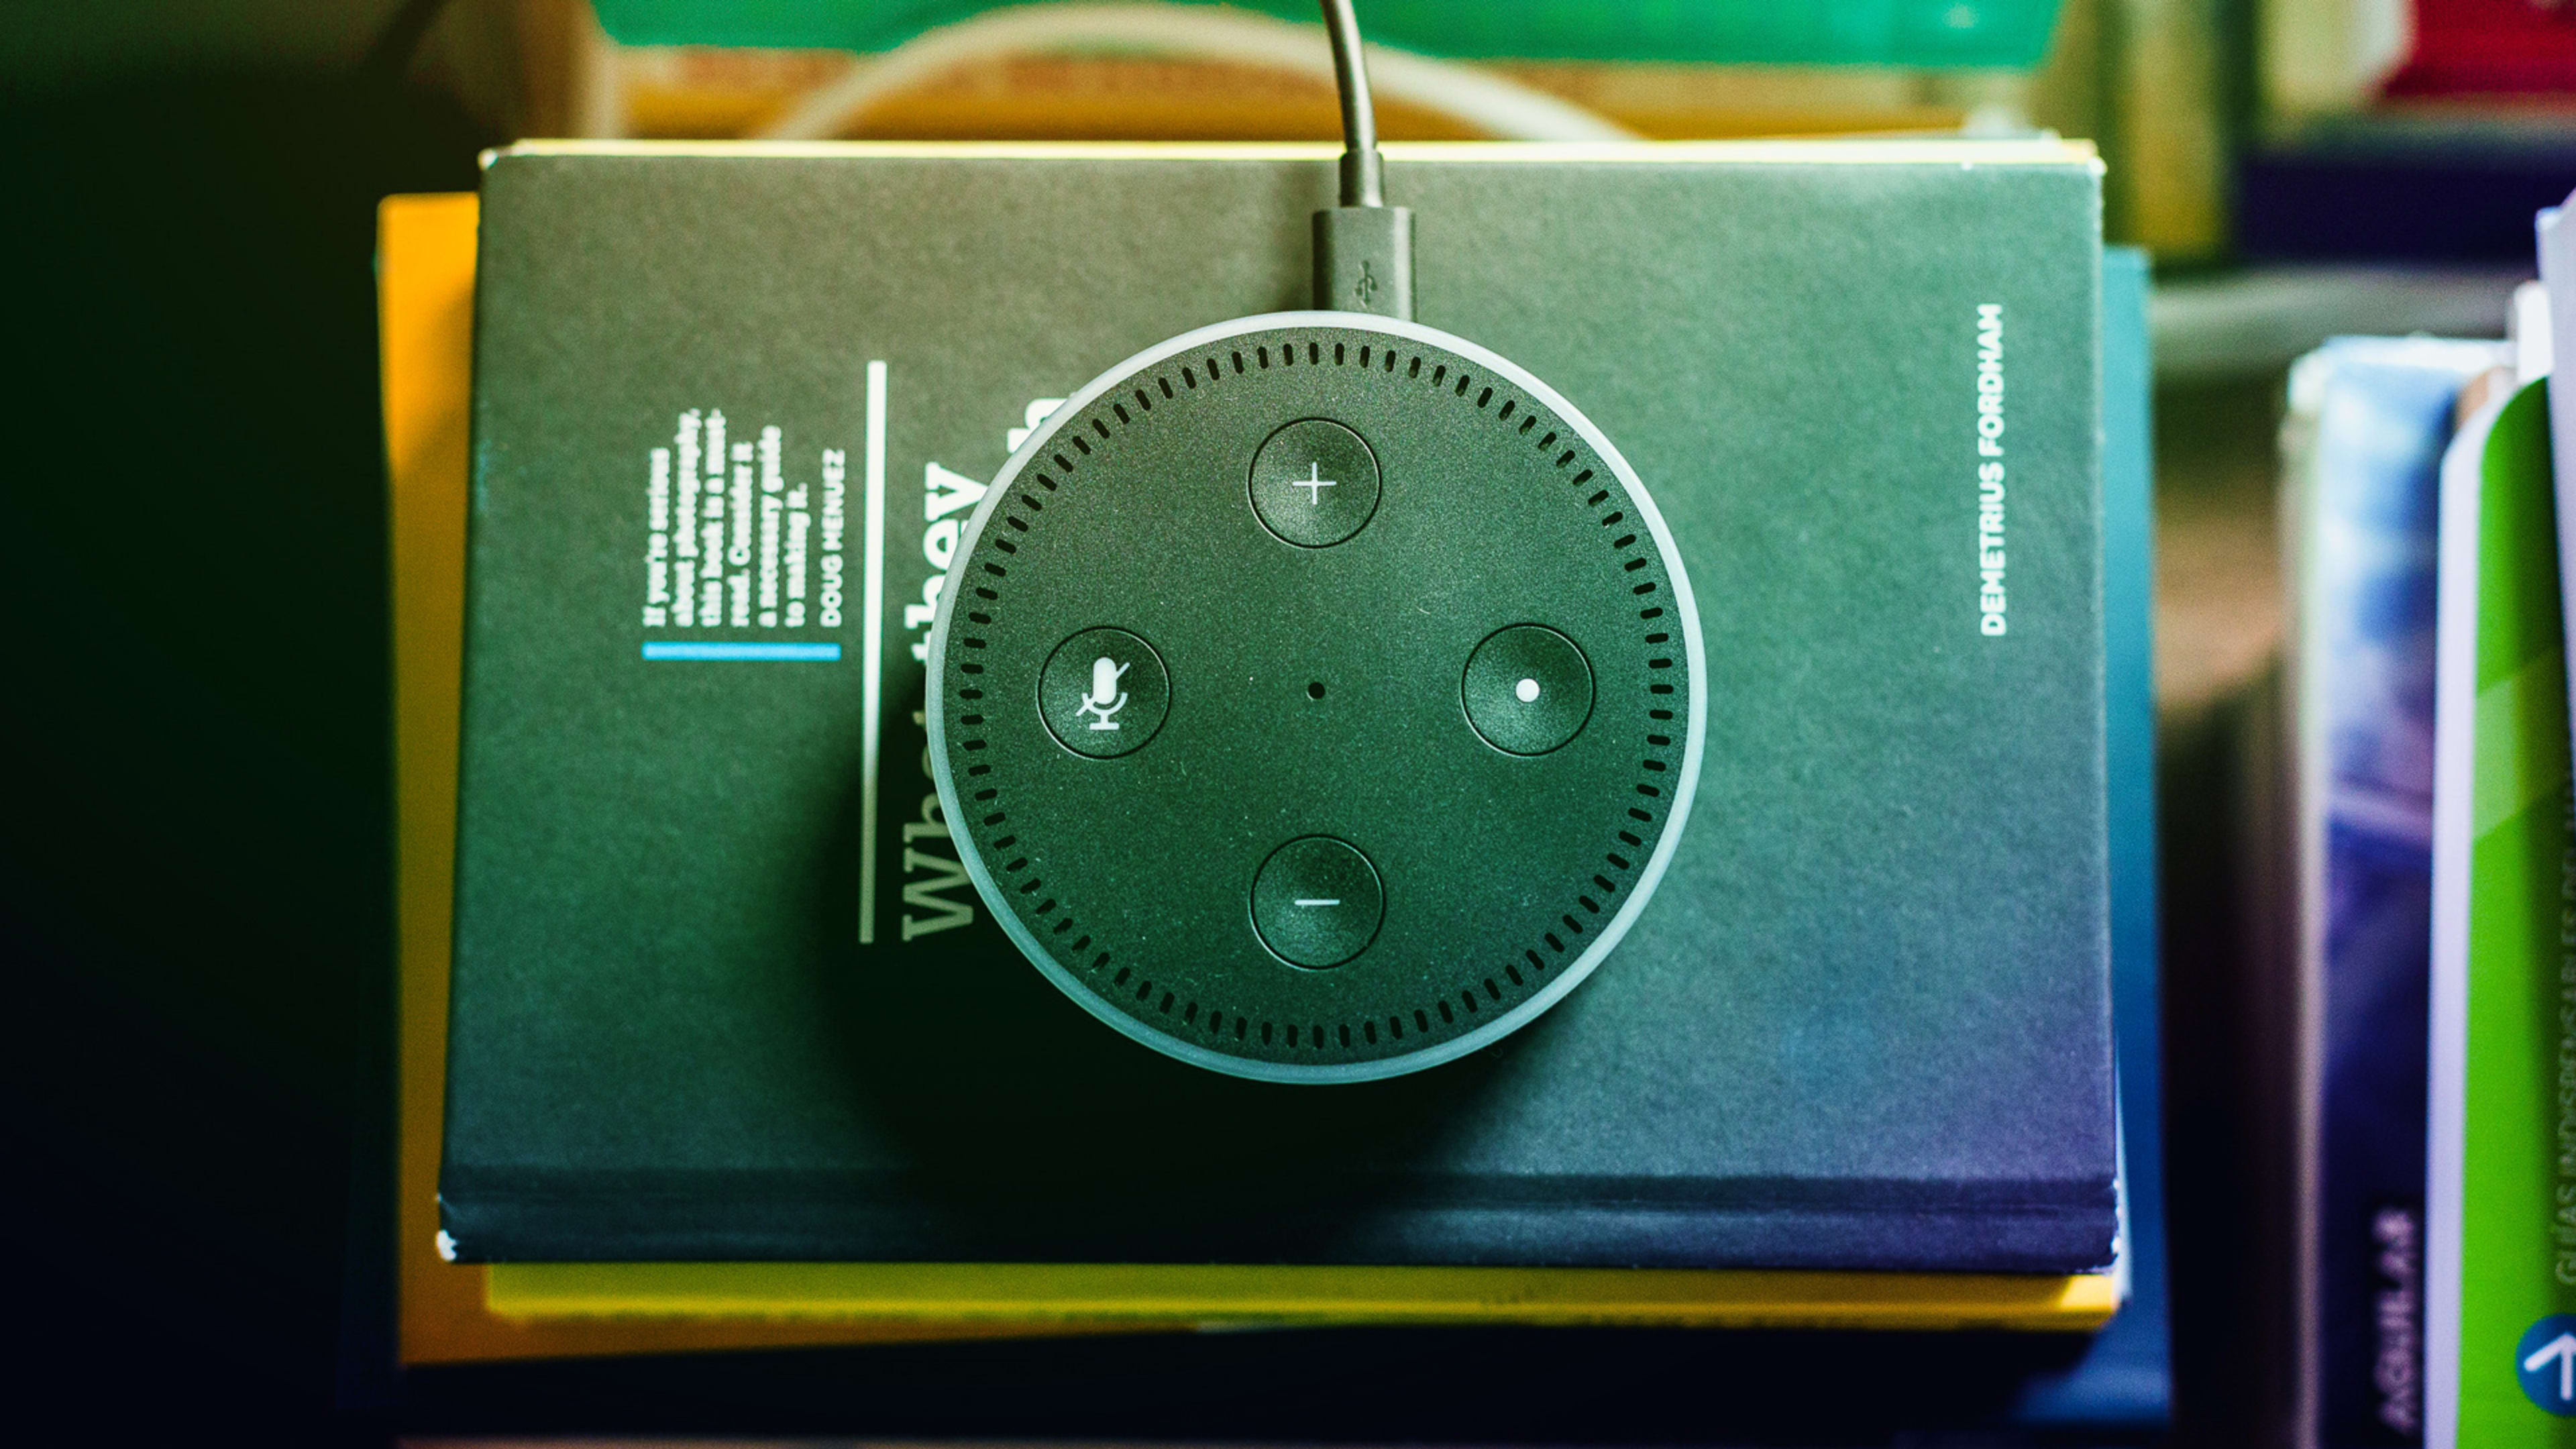 Microsoft and Amazon are working together to make Cortana and Alexa friends